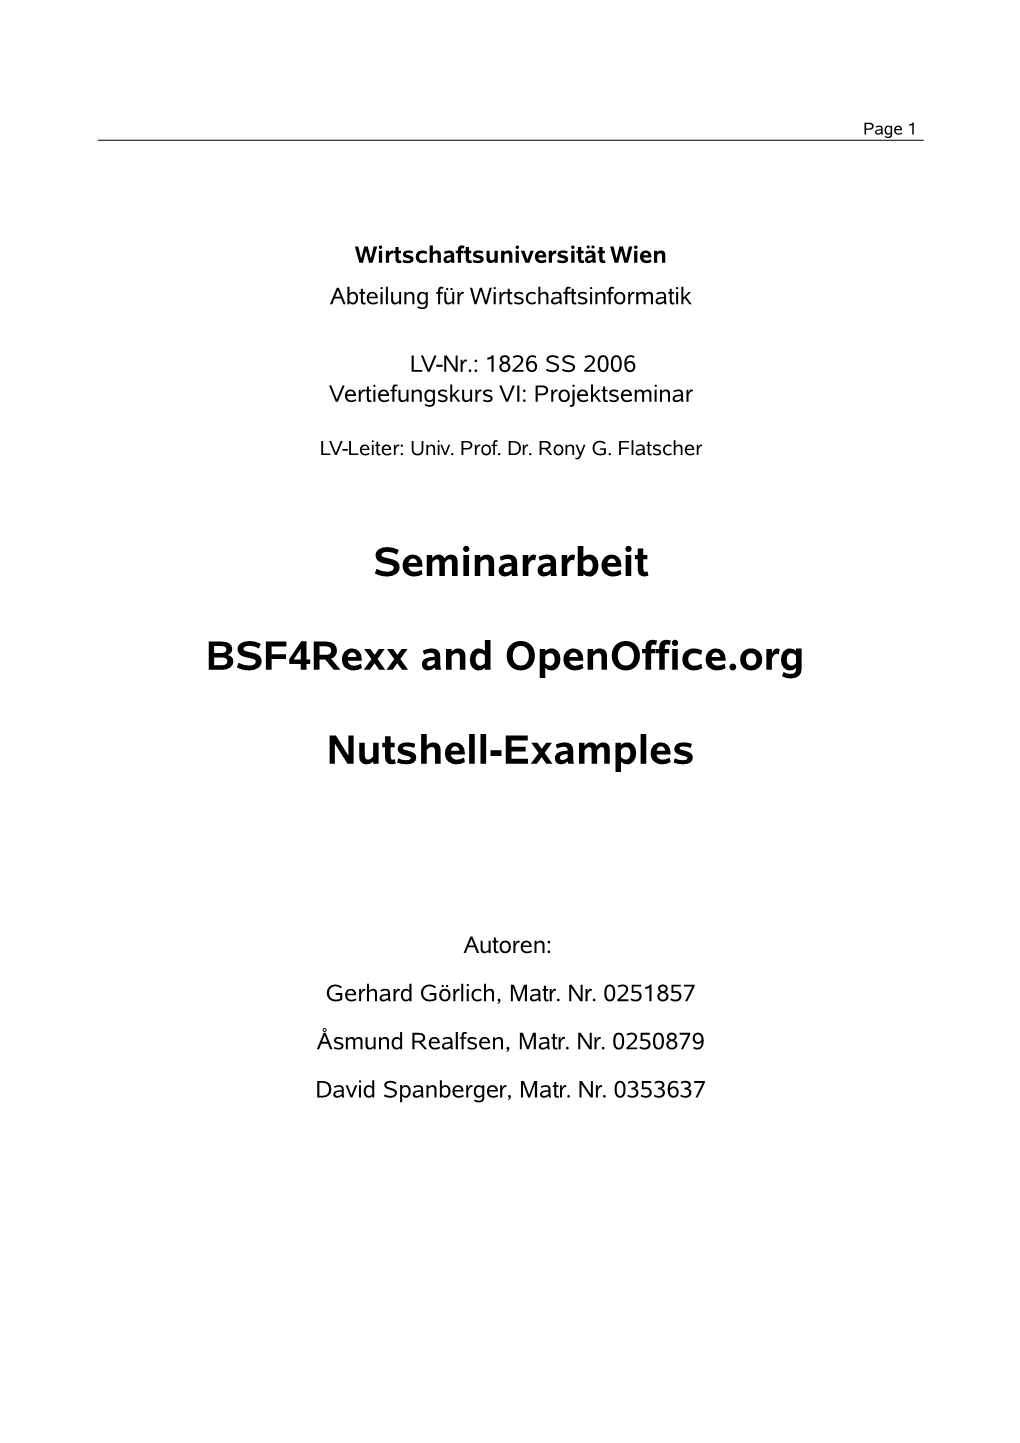 Bsf4rexx and Openoffice.Org Nutshell-Examples